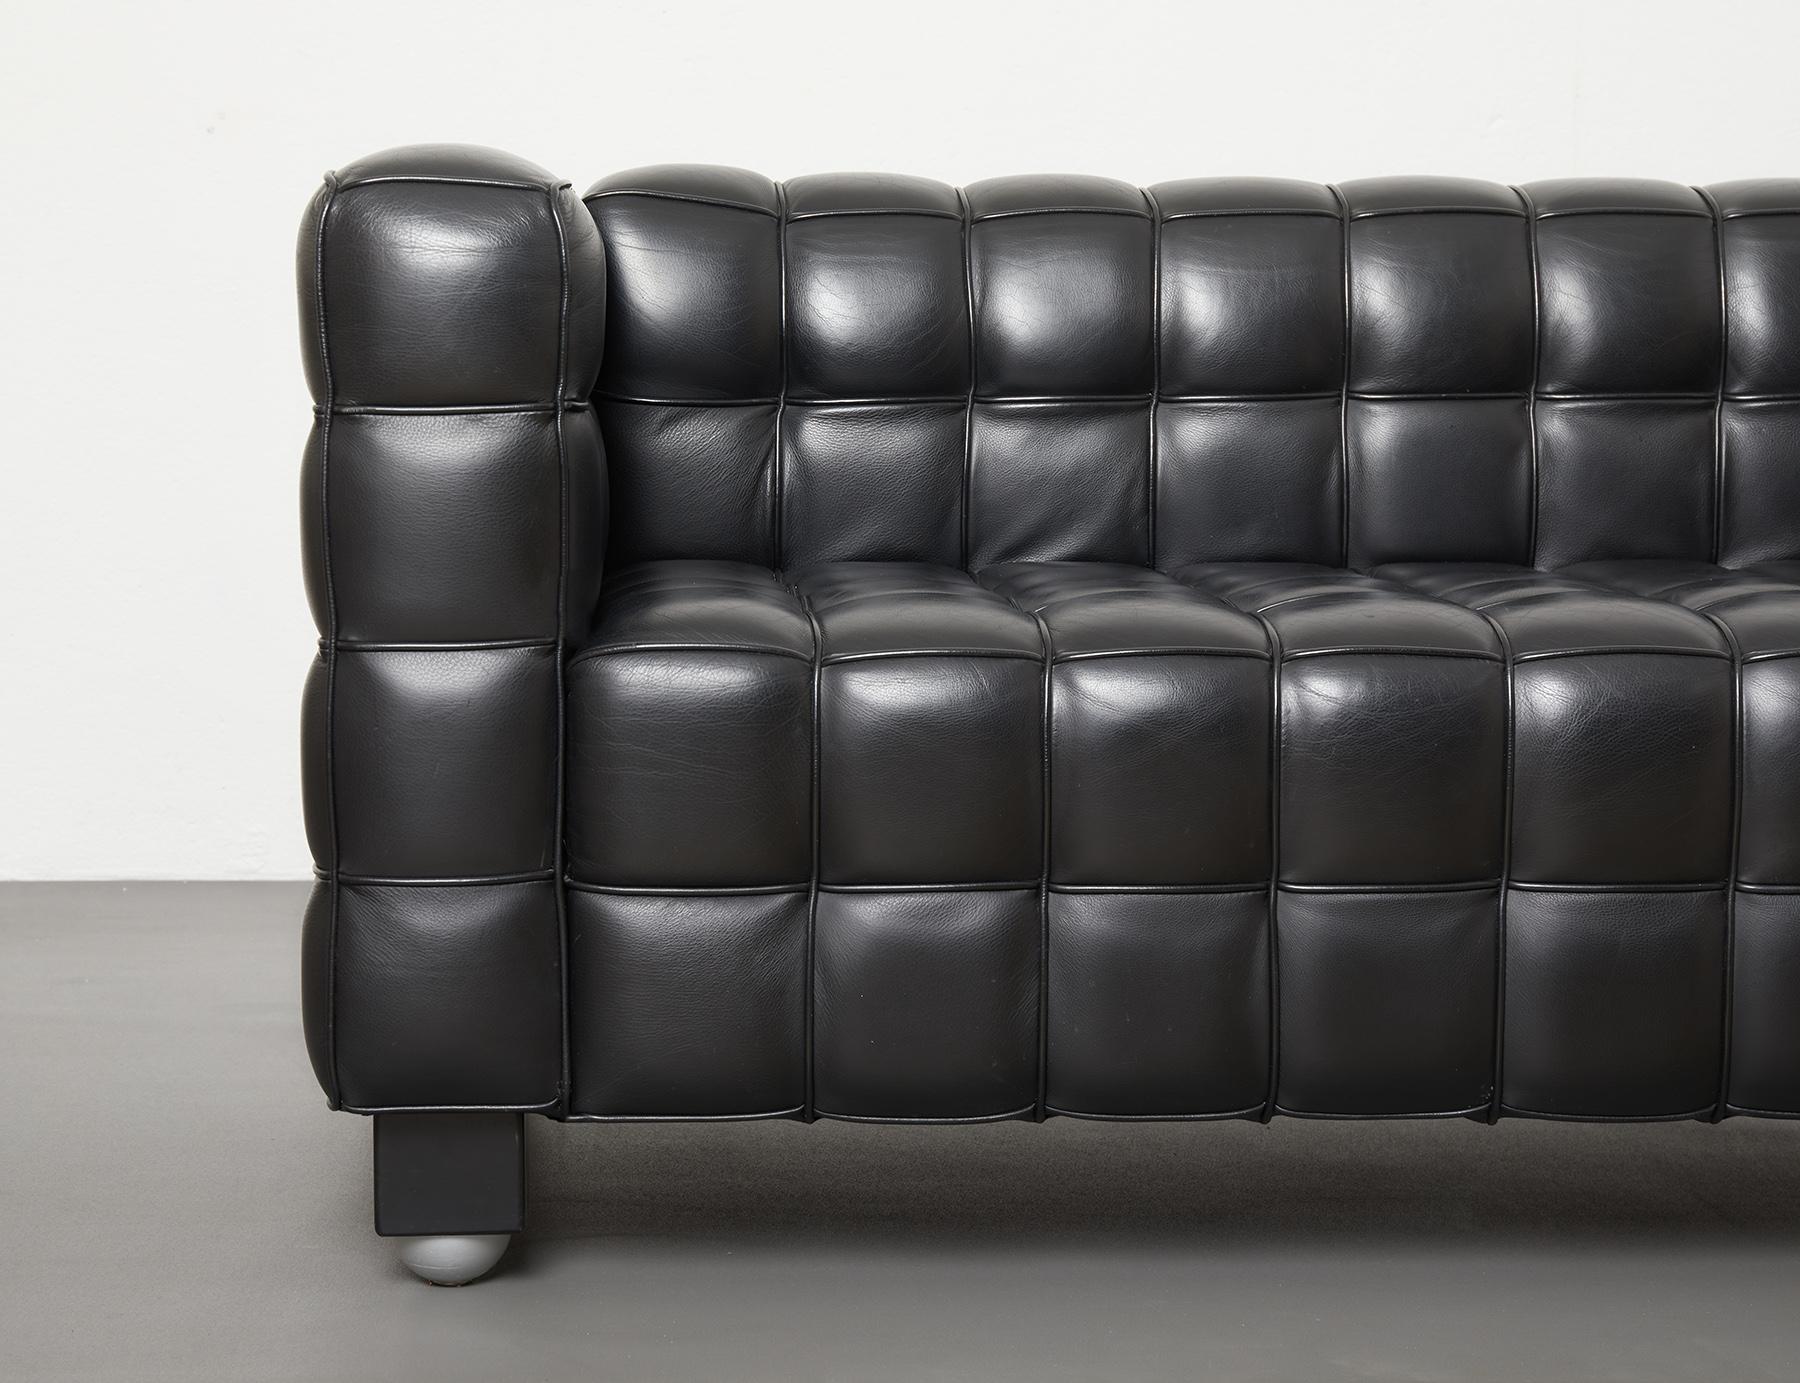 Mid-Century Modern Black Leather Kubus Sofa by Josef Hoffmann, Wittmann c.1980 In Good Condition For Sale In Renens, CH